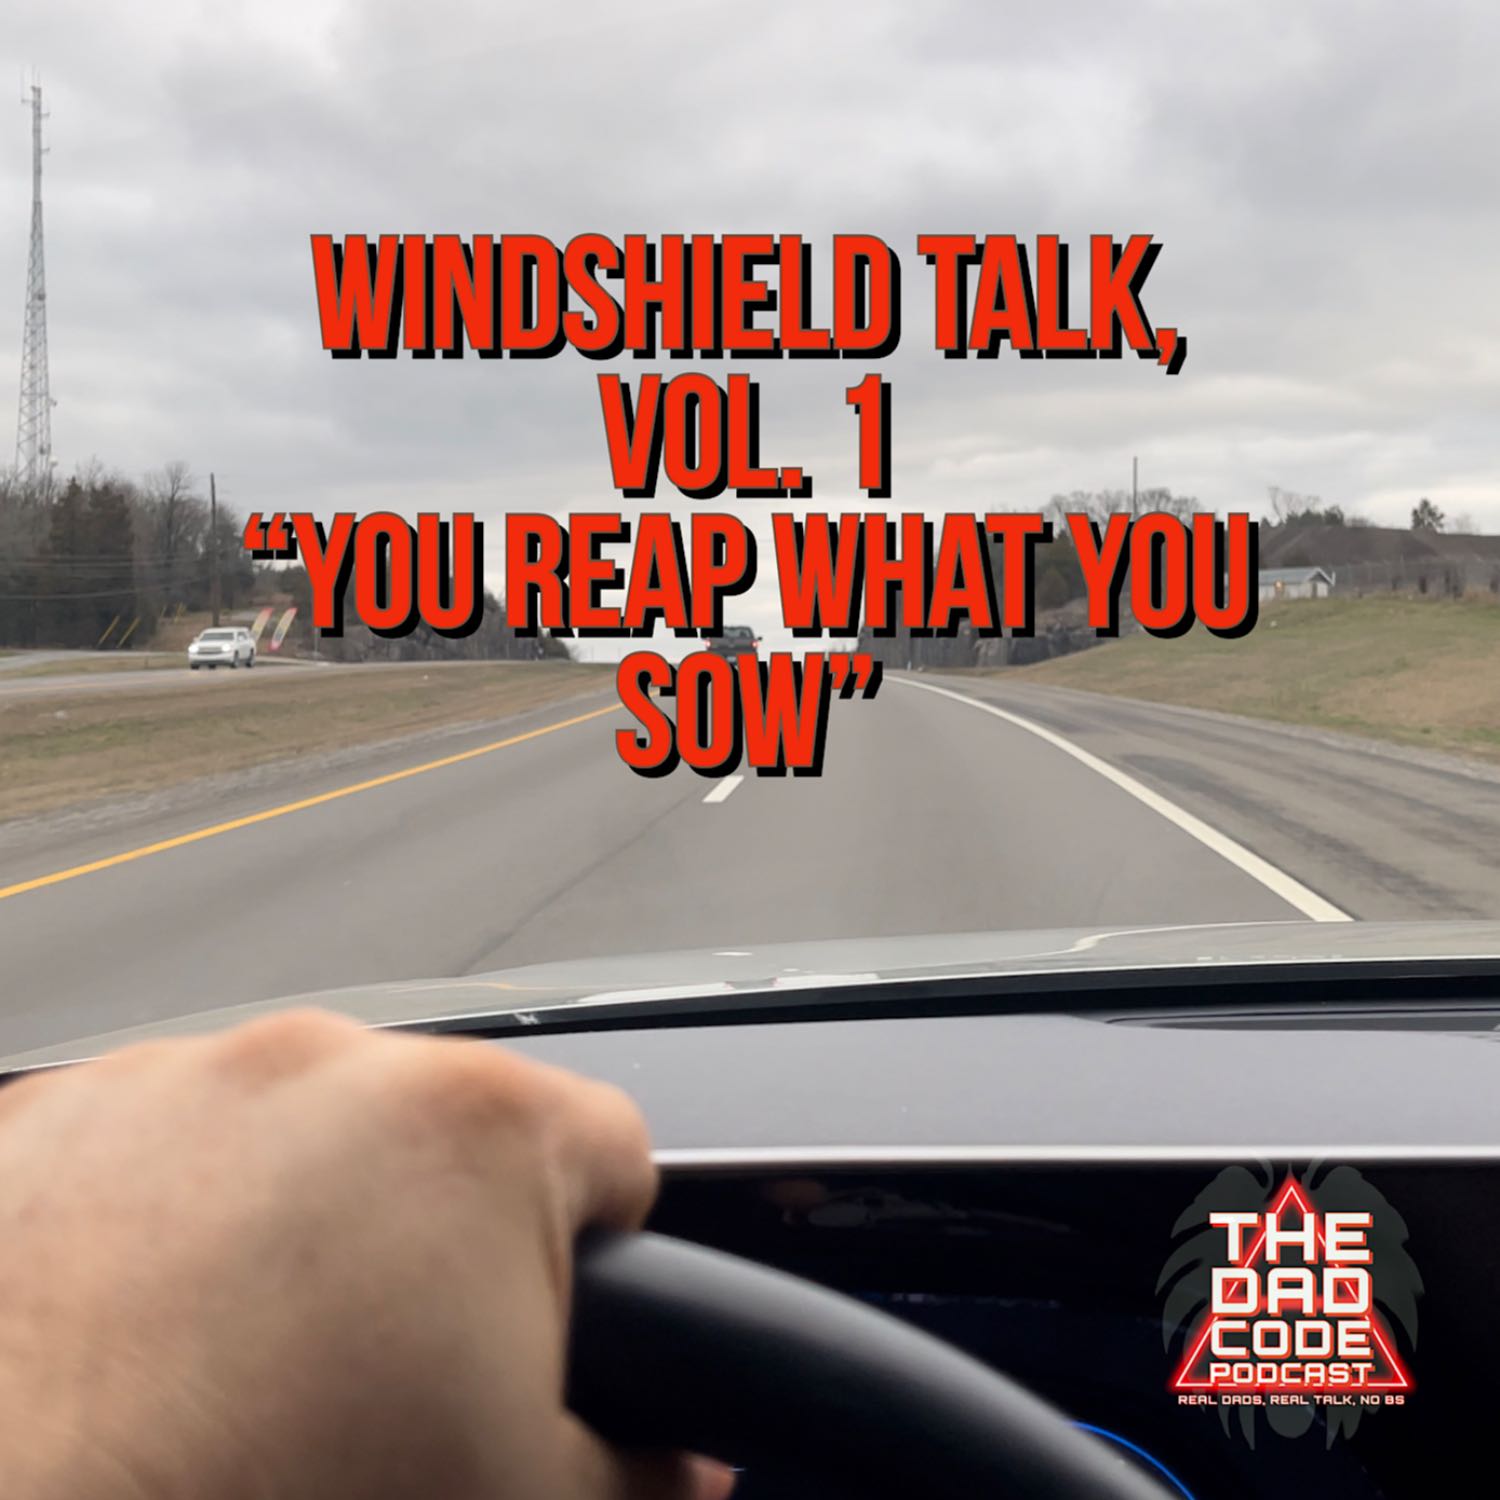 Windshield Talk, vol. 1–“You Reap What You Sew”